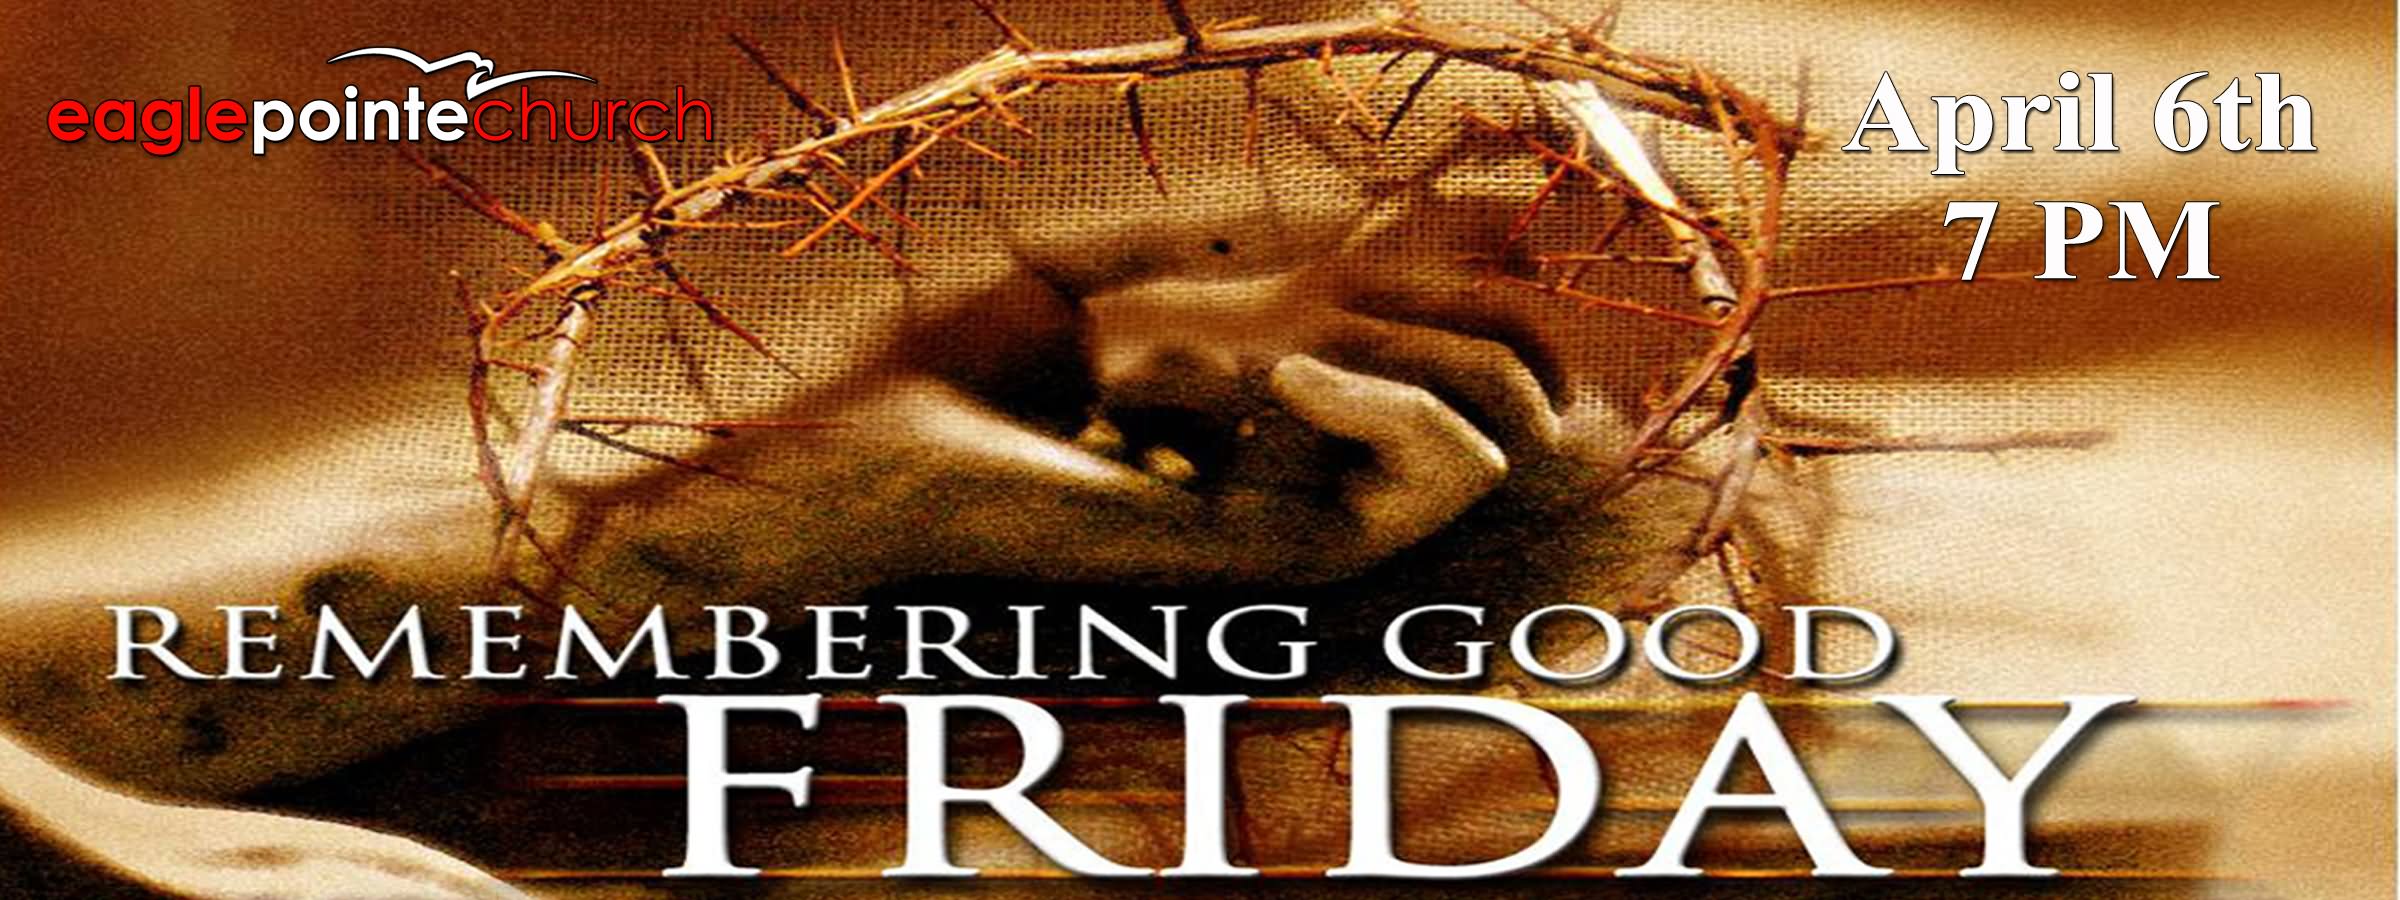 Remembering Good Friday Facebook Cover Image